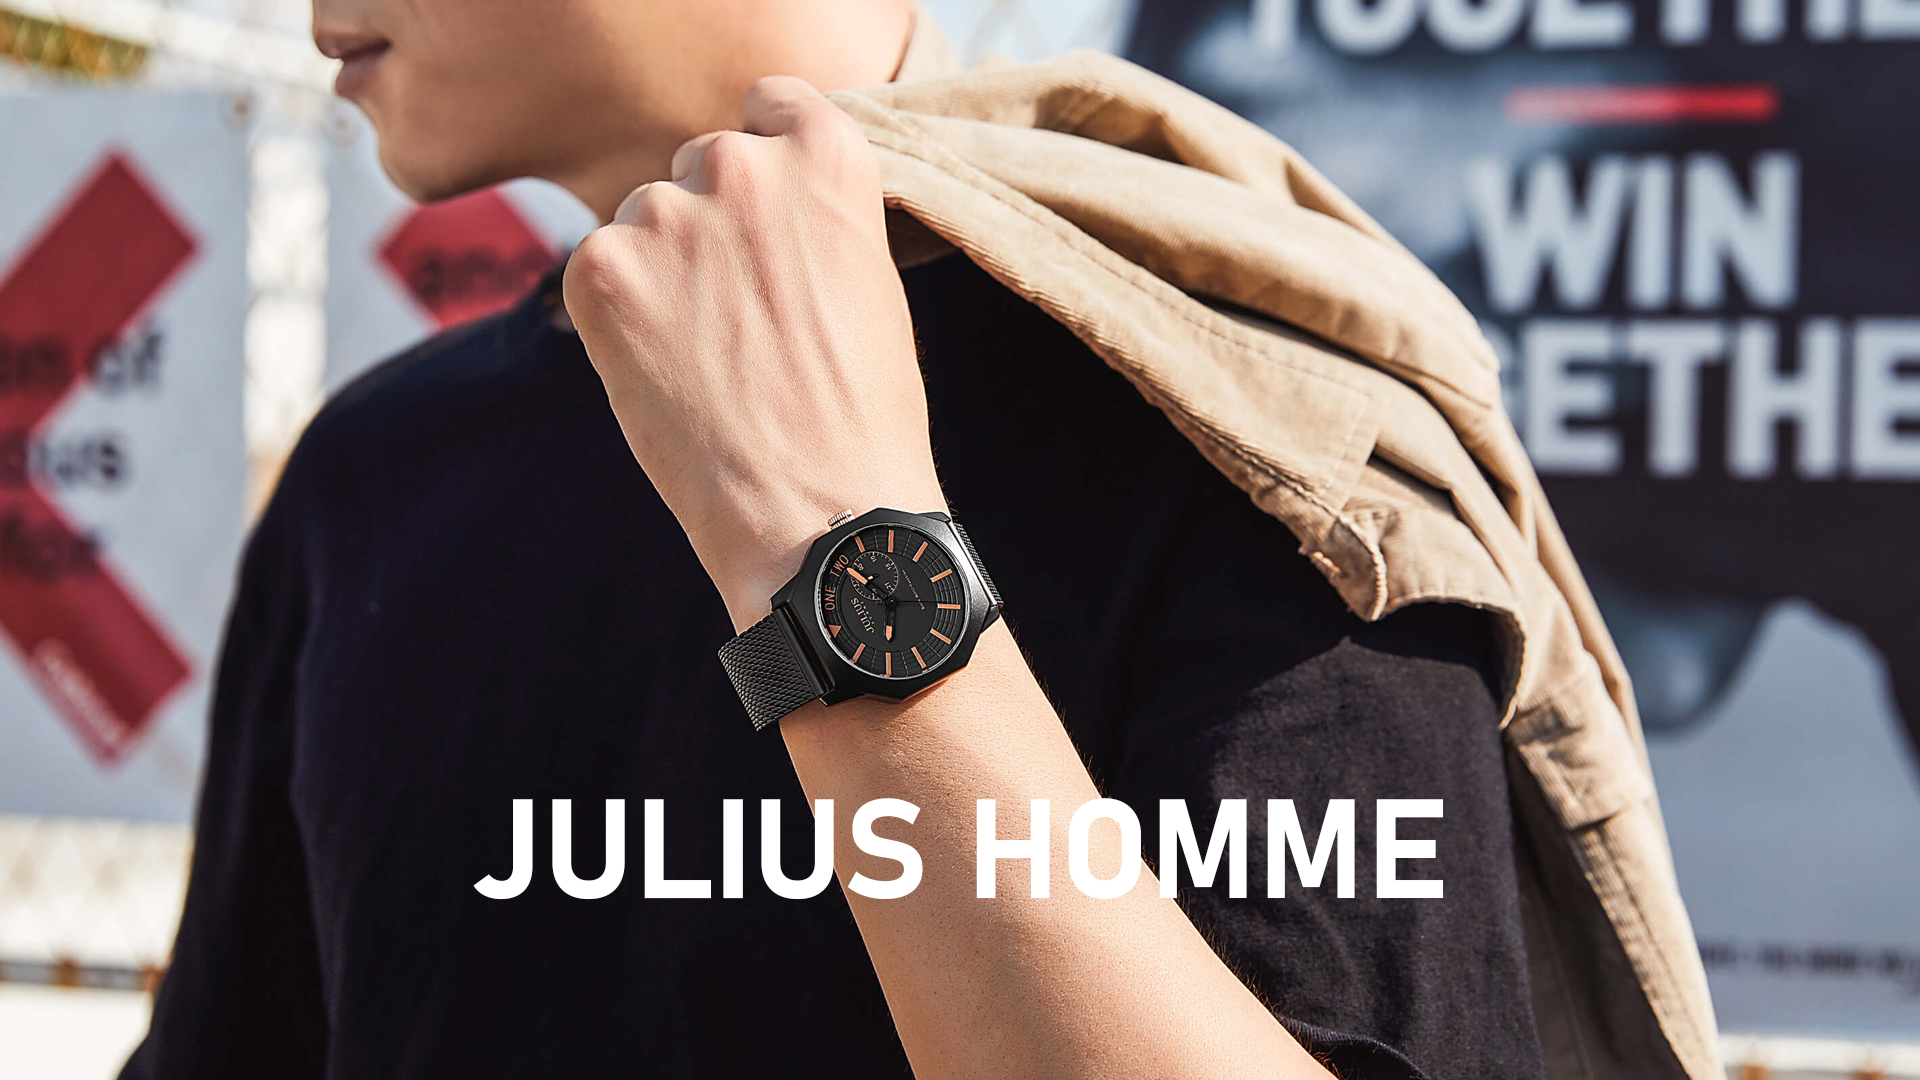 JULIUS HOMME WATCH COLLECTION